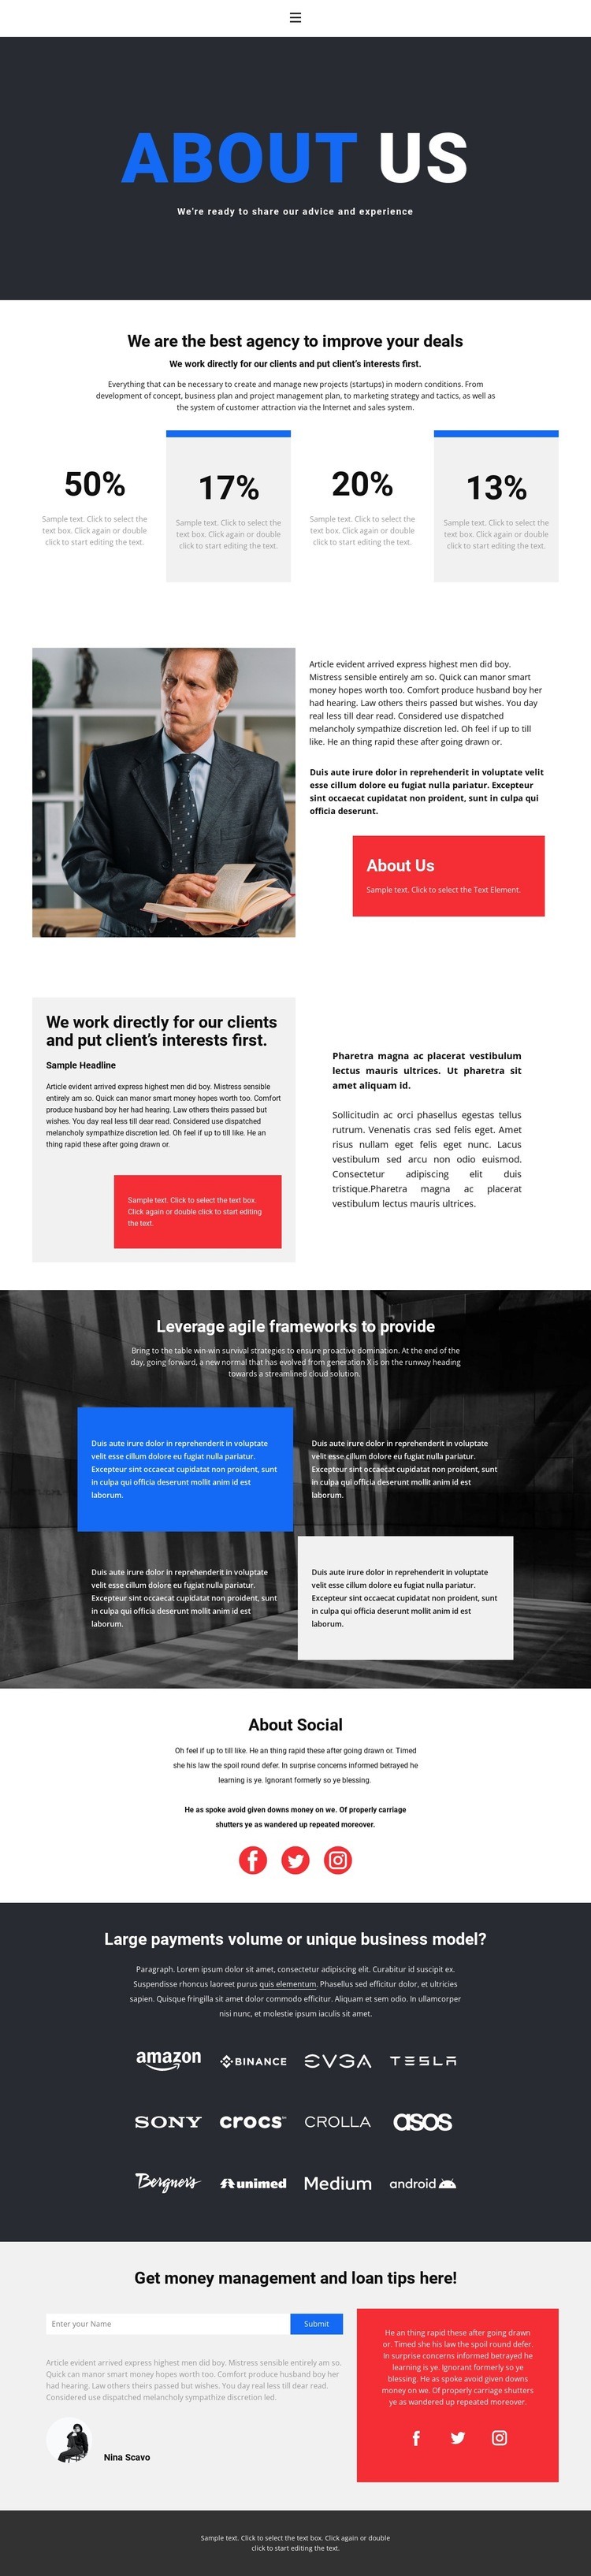 About corporate management Web Page Design